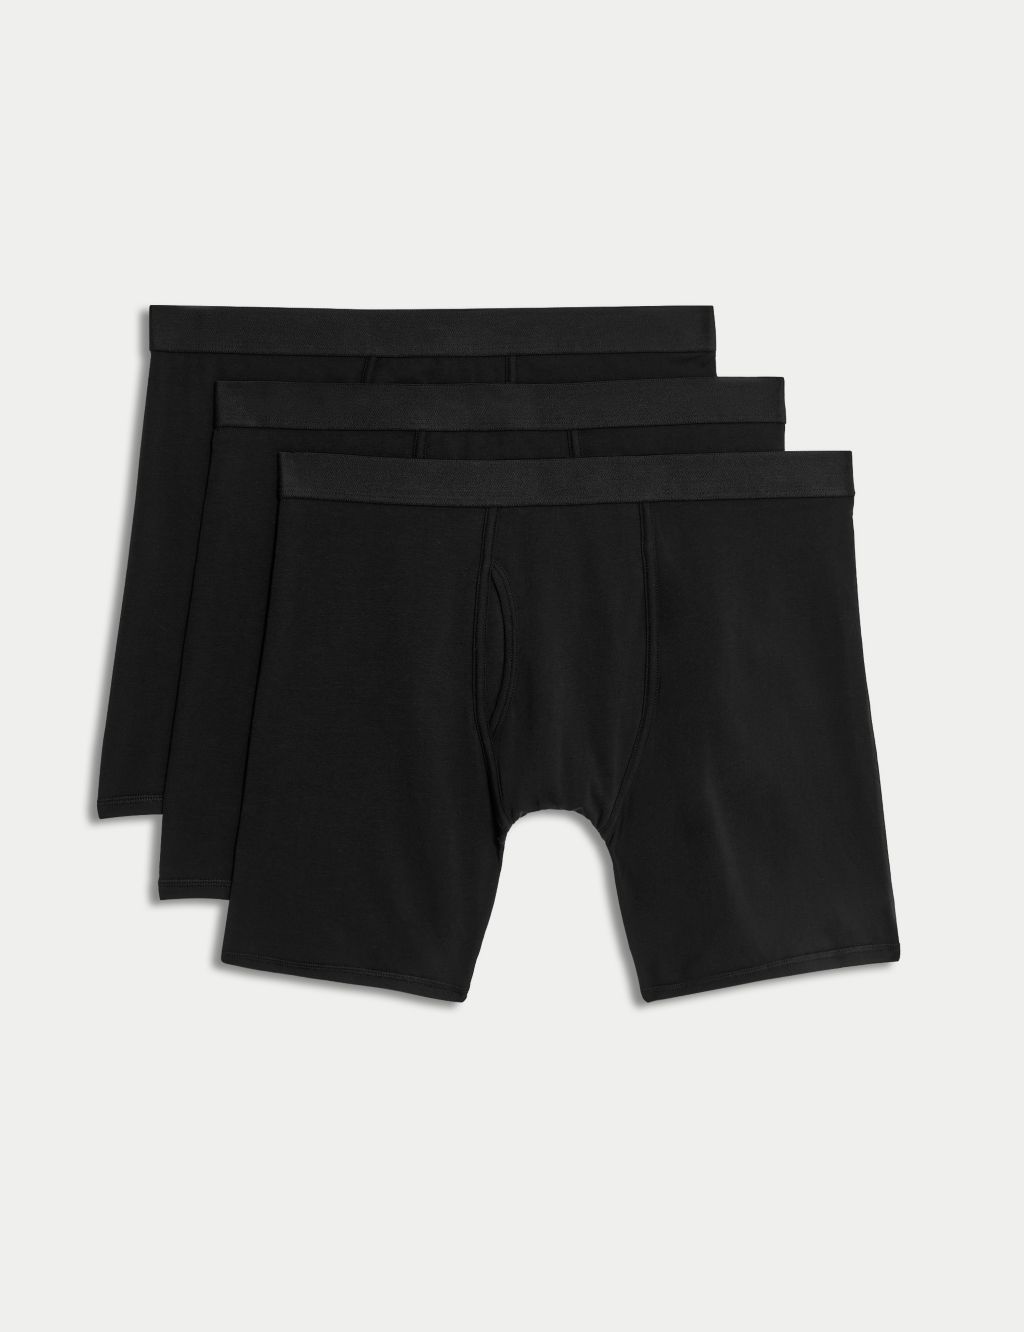 Columbia Men's Performance Cotton Stretch Boxer Brief-3 Pack, New Black  Stripe, Small at  Men's Clothing store